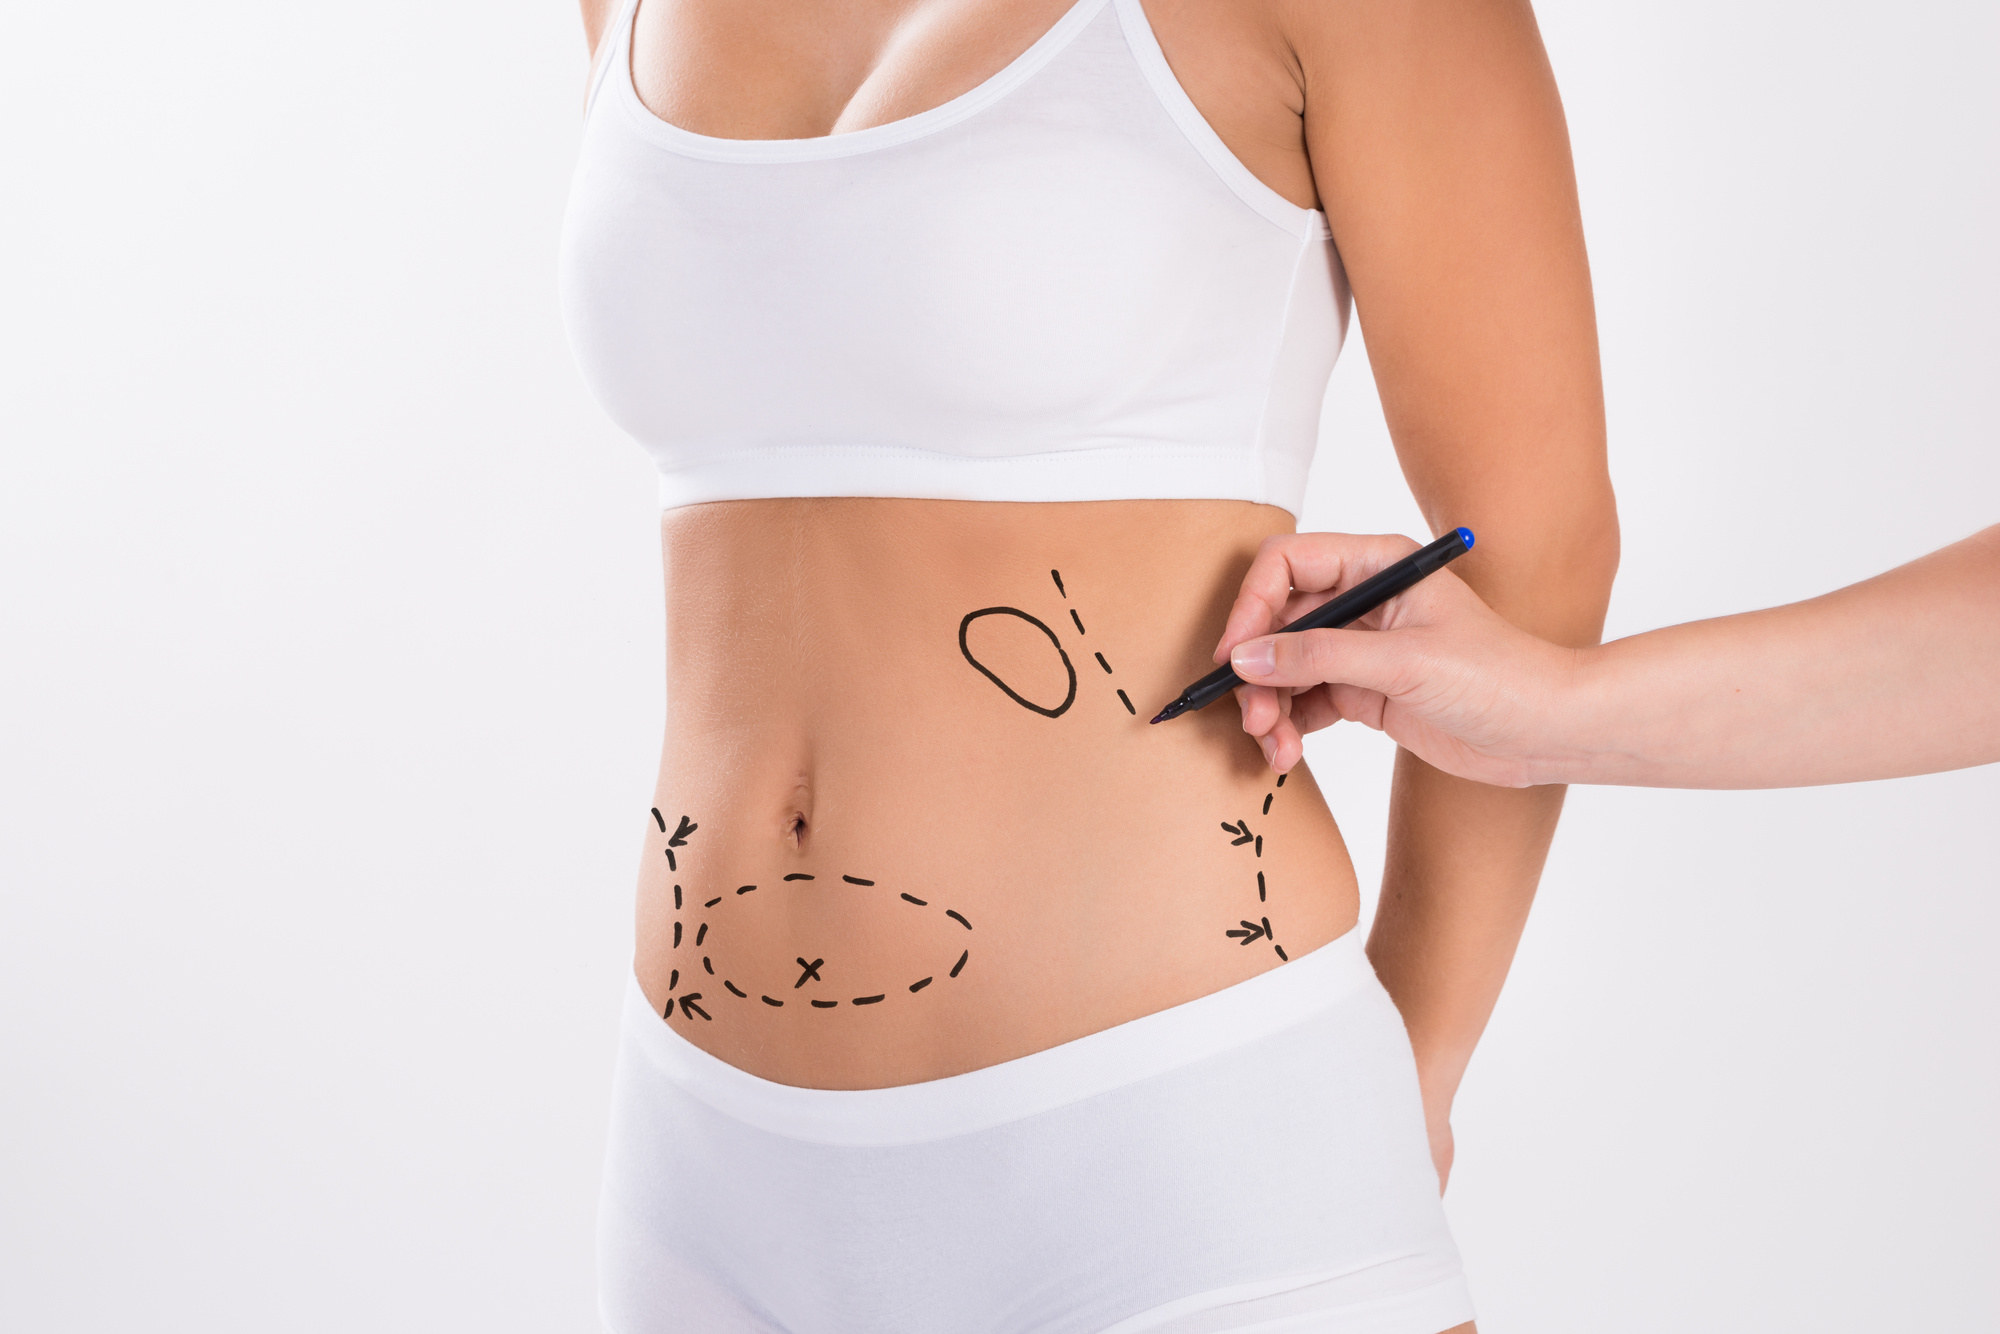 7 Important Things that You Should Know Before Tummy Tuck Surgery